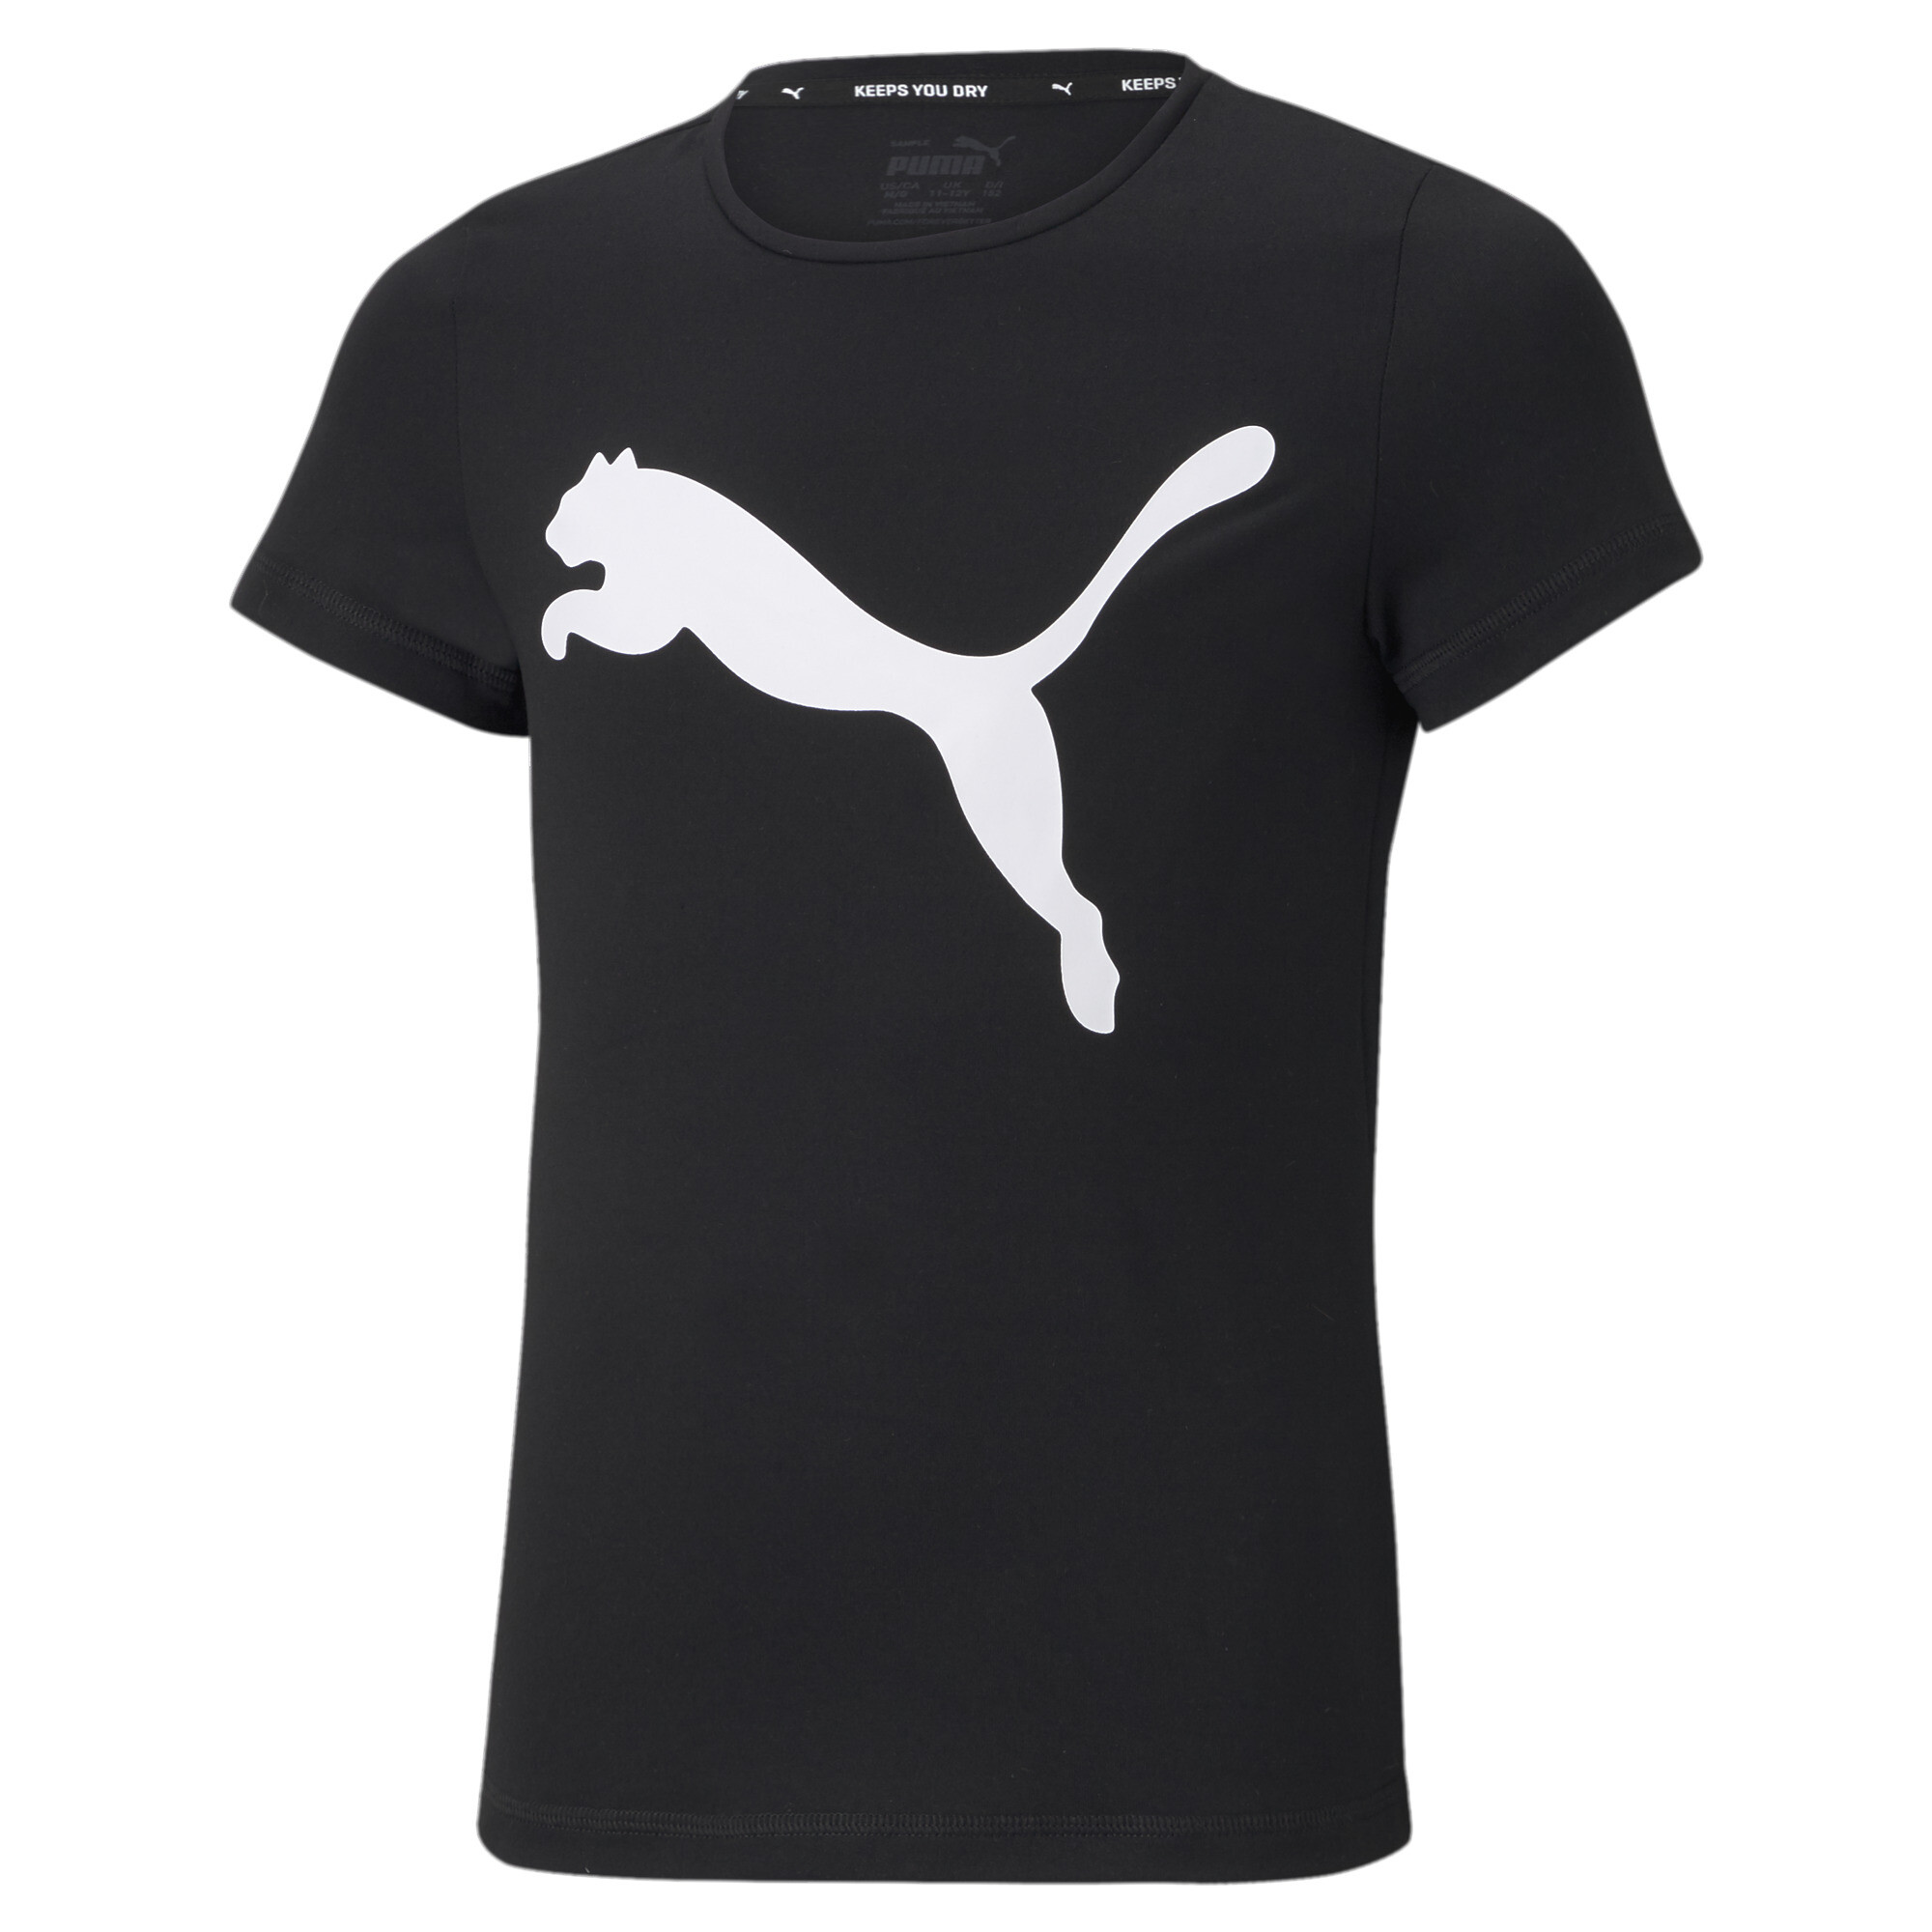 Women's Puma Active Youth T-Shirt, Black, Size 15-16Y, Clothing